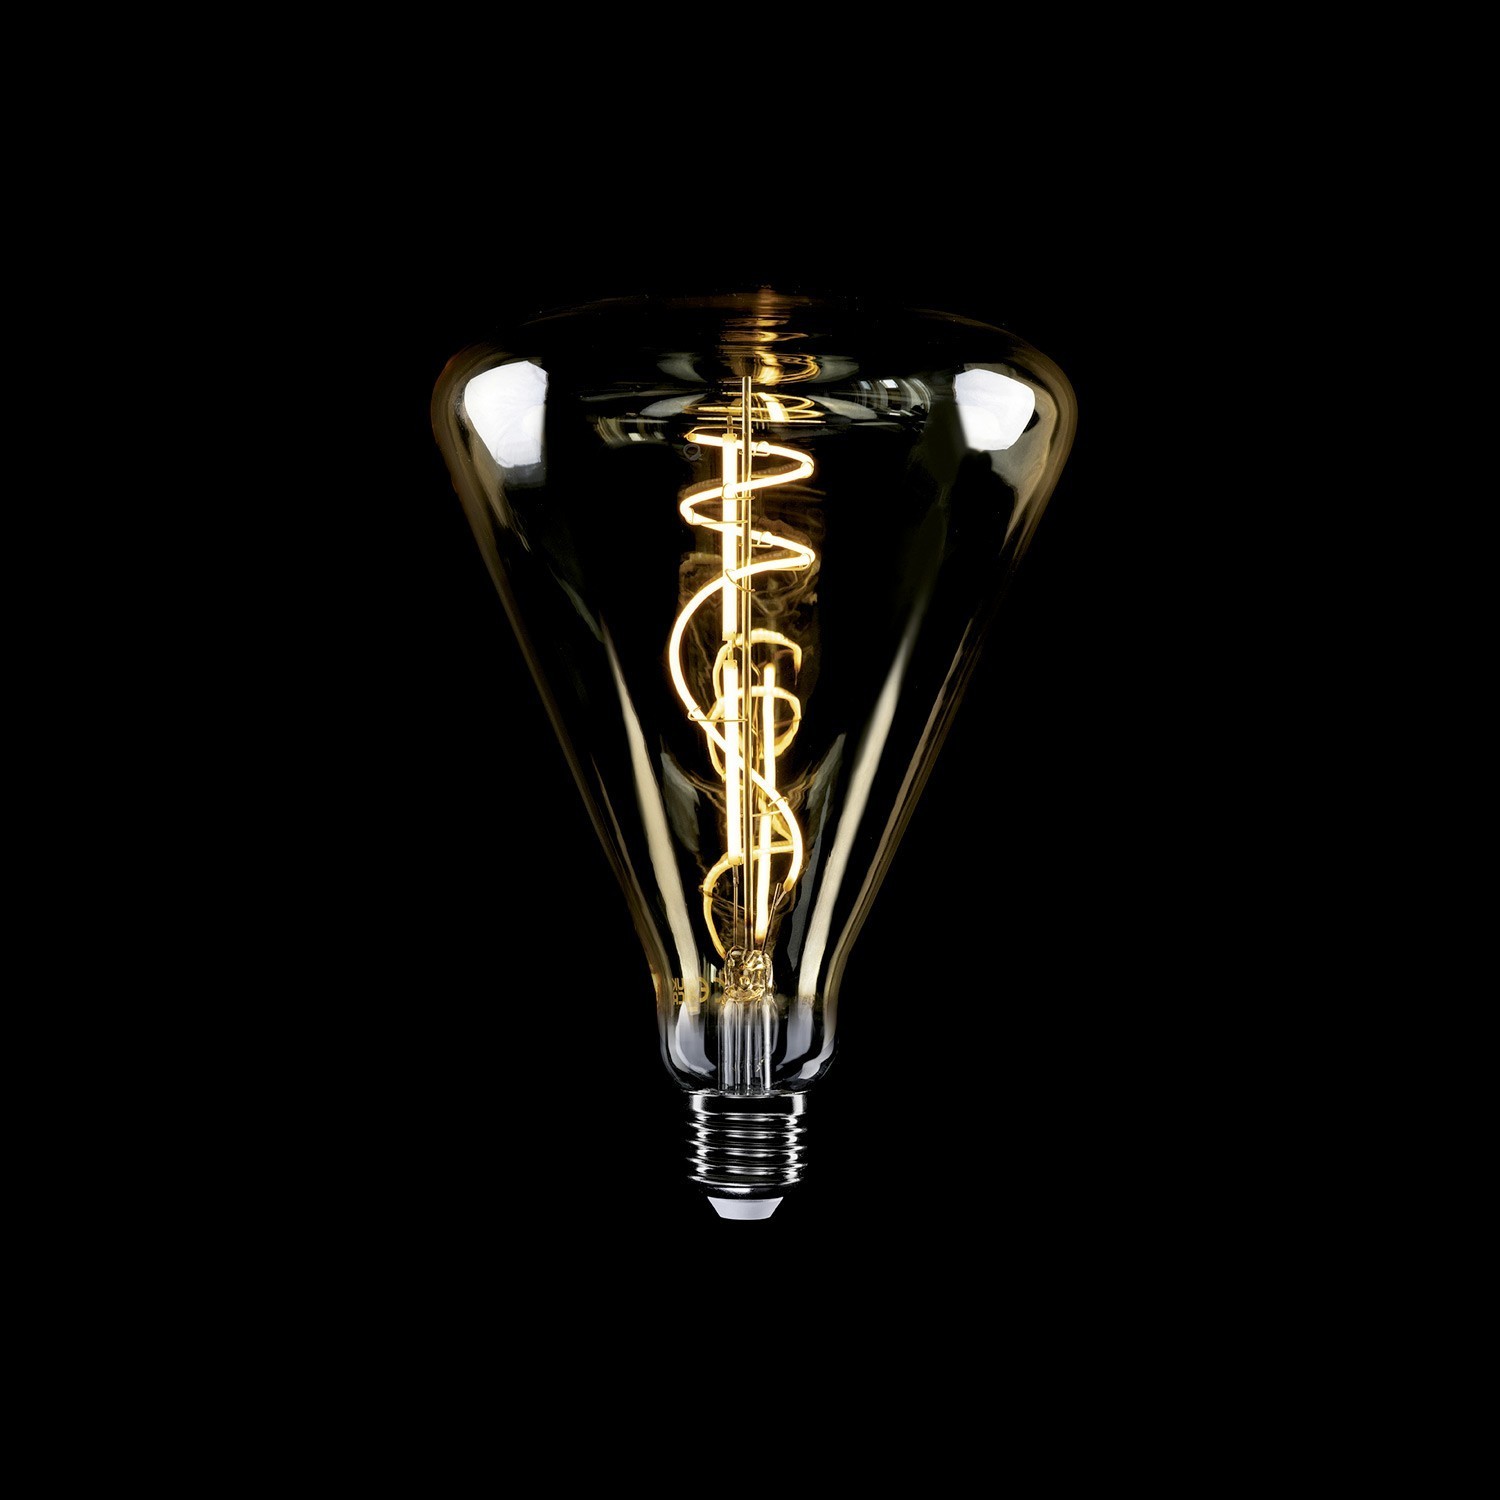 LED Golden Light Bulb Cone 140 8,5W 806Lm E27 2200K Dimmable - H06